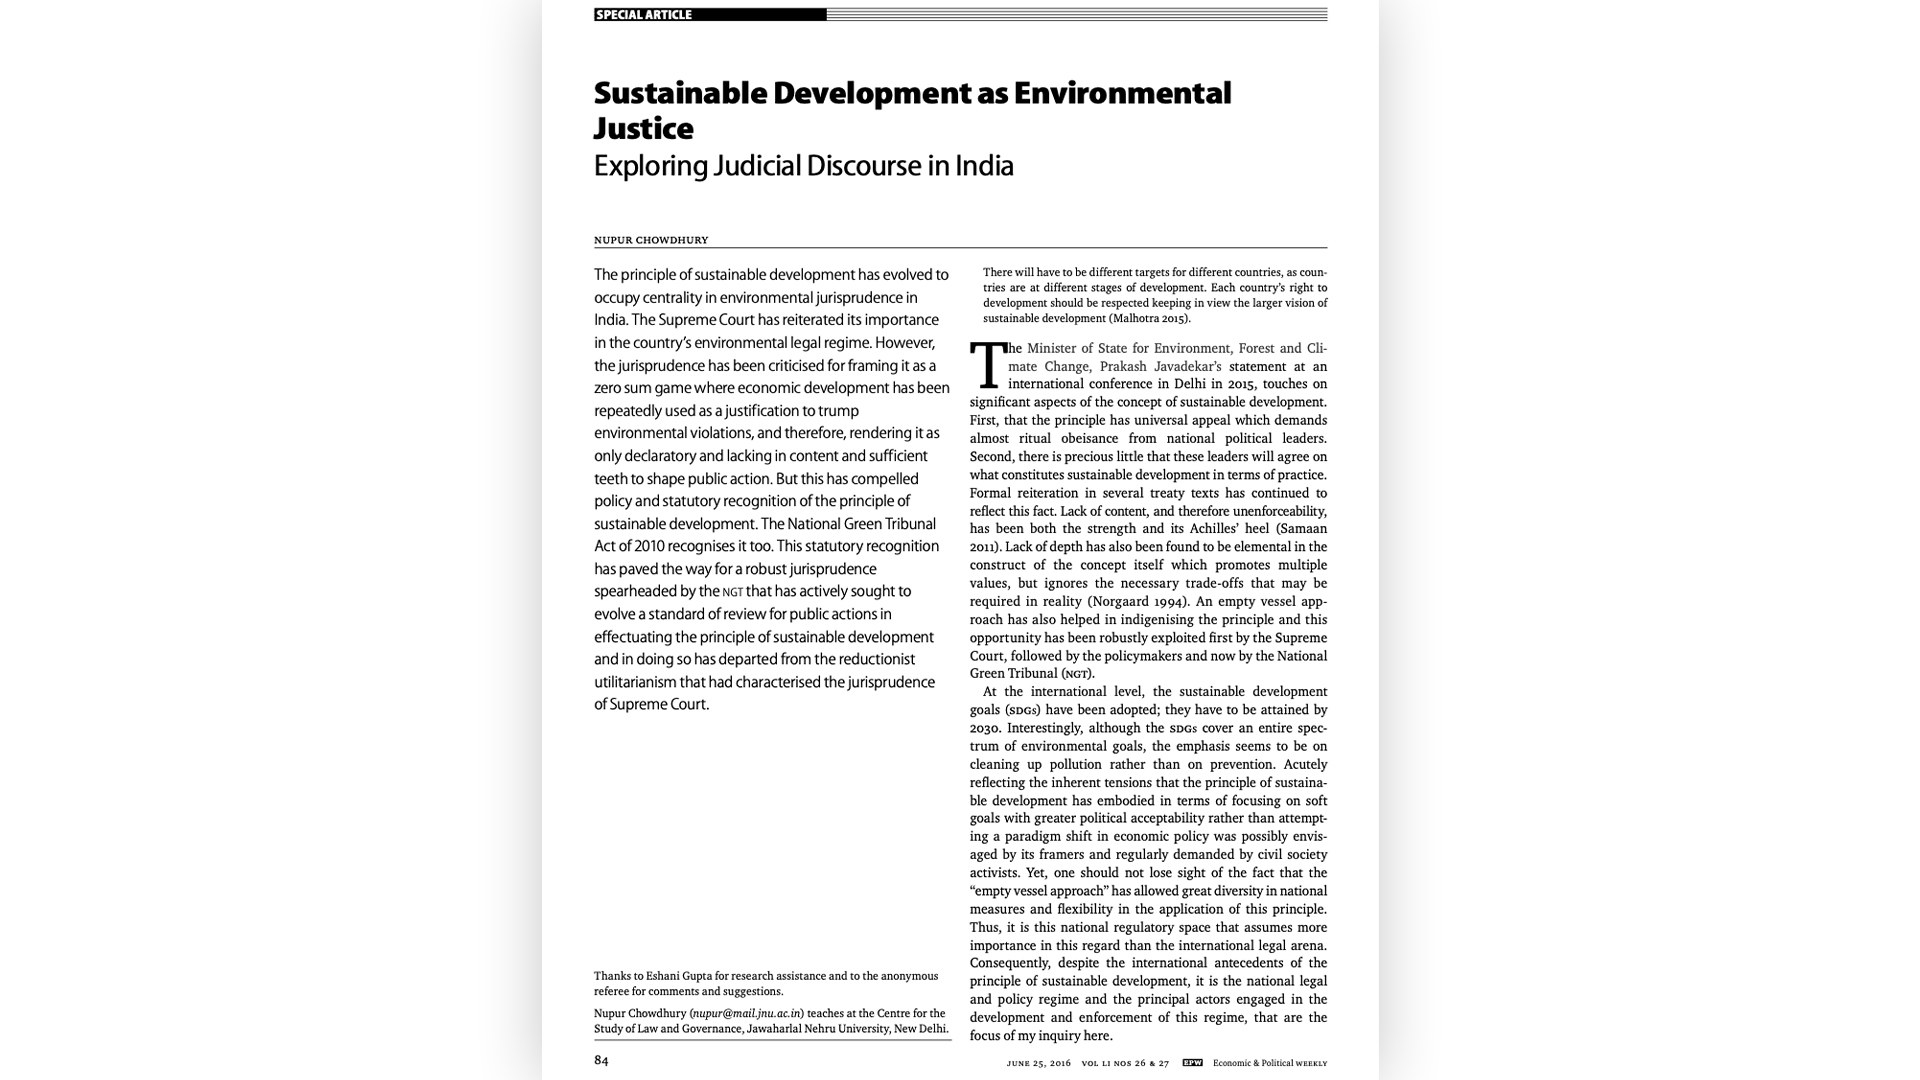 Sustainable Development as Environmental Justice